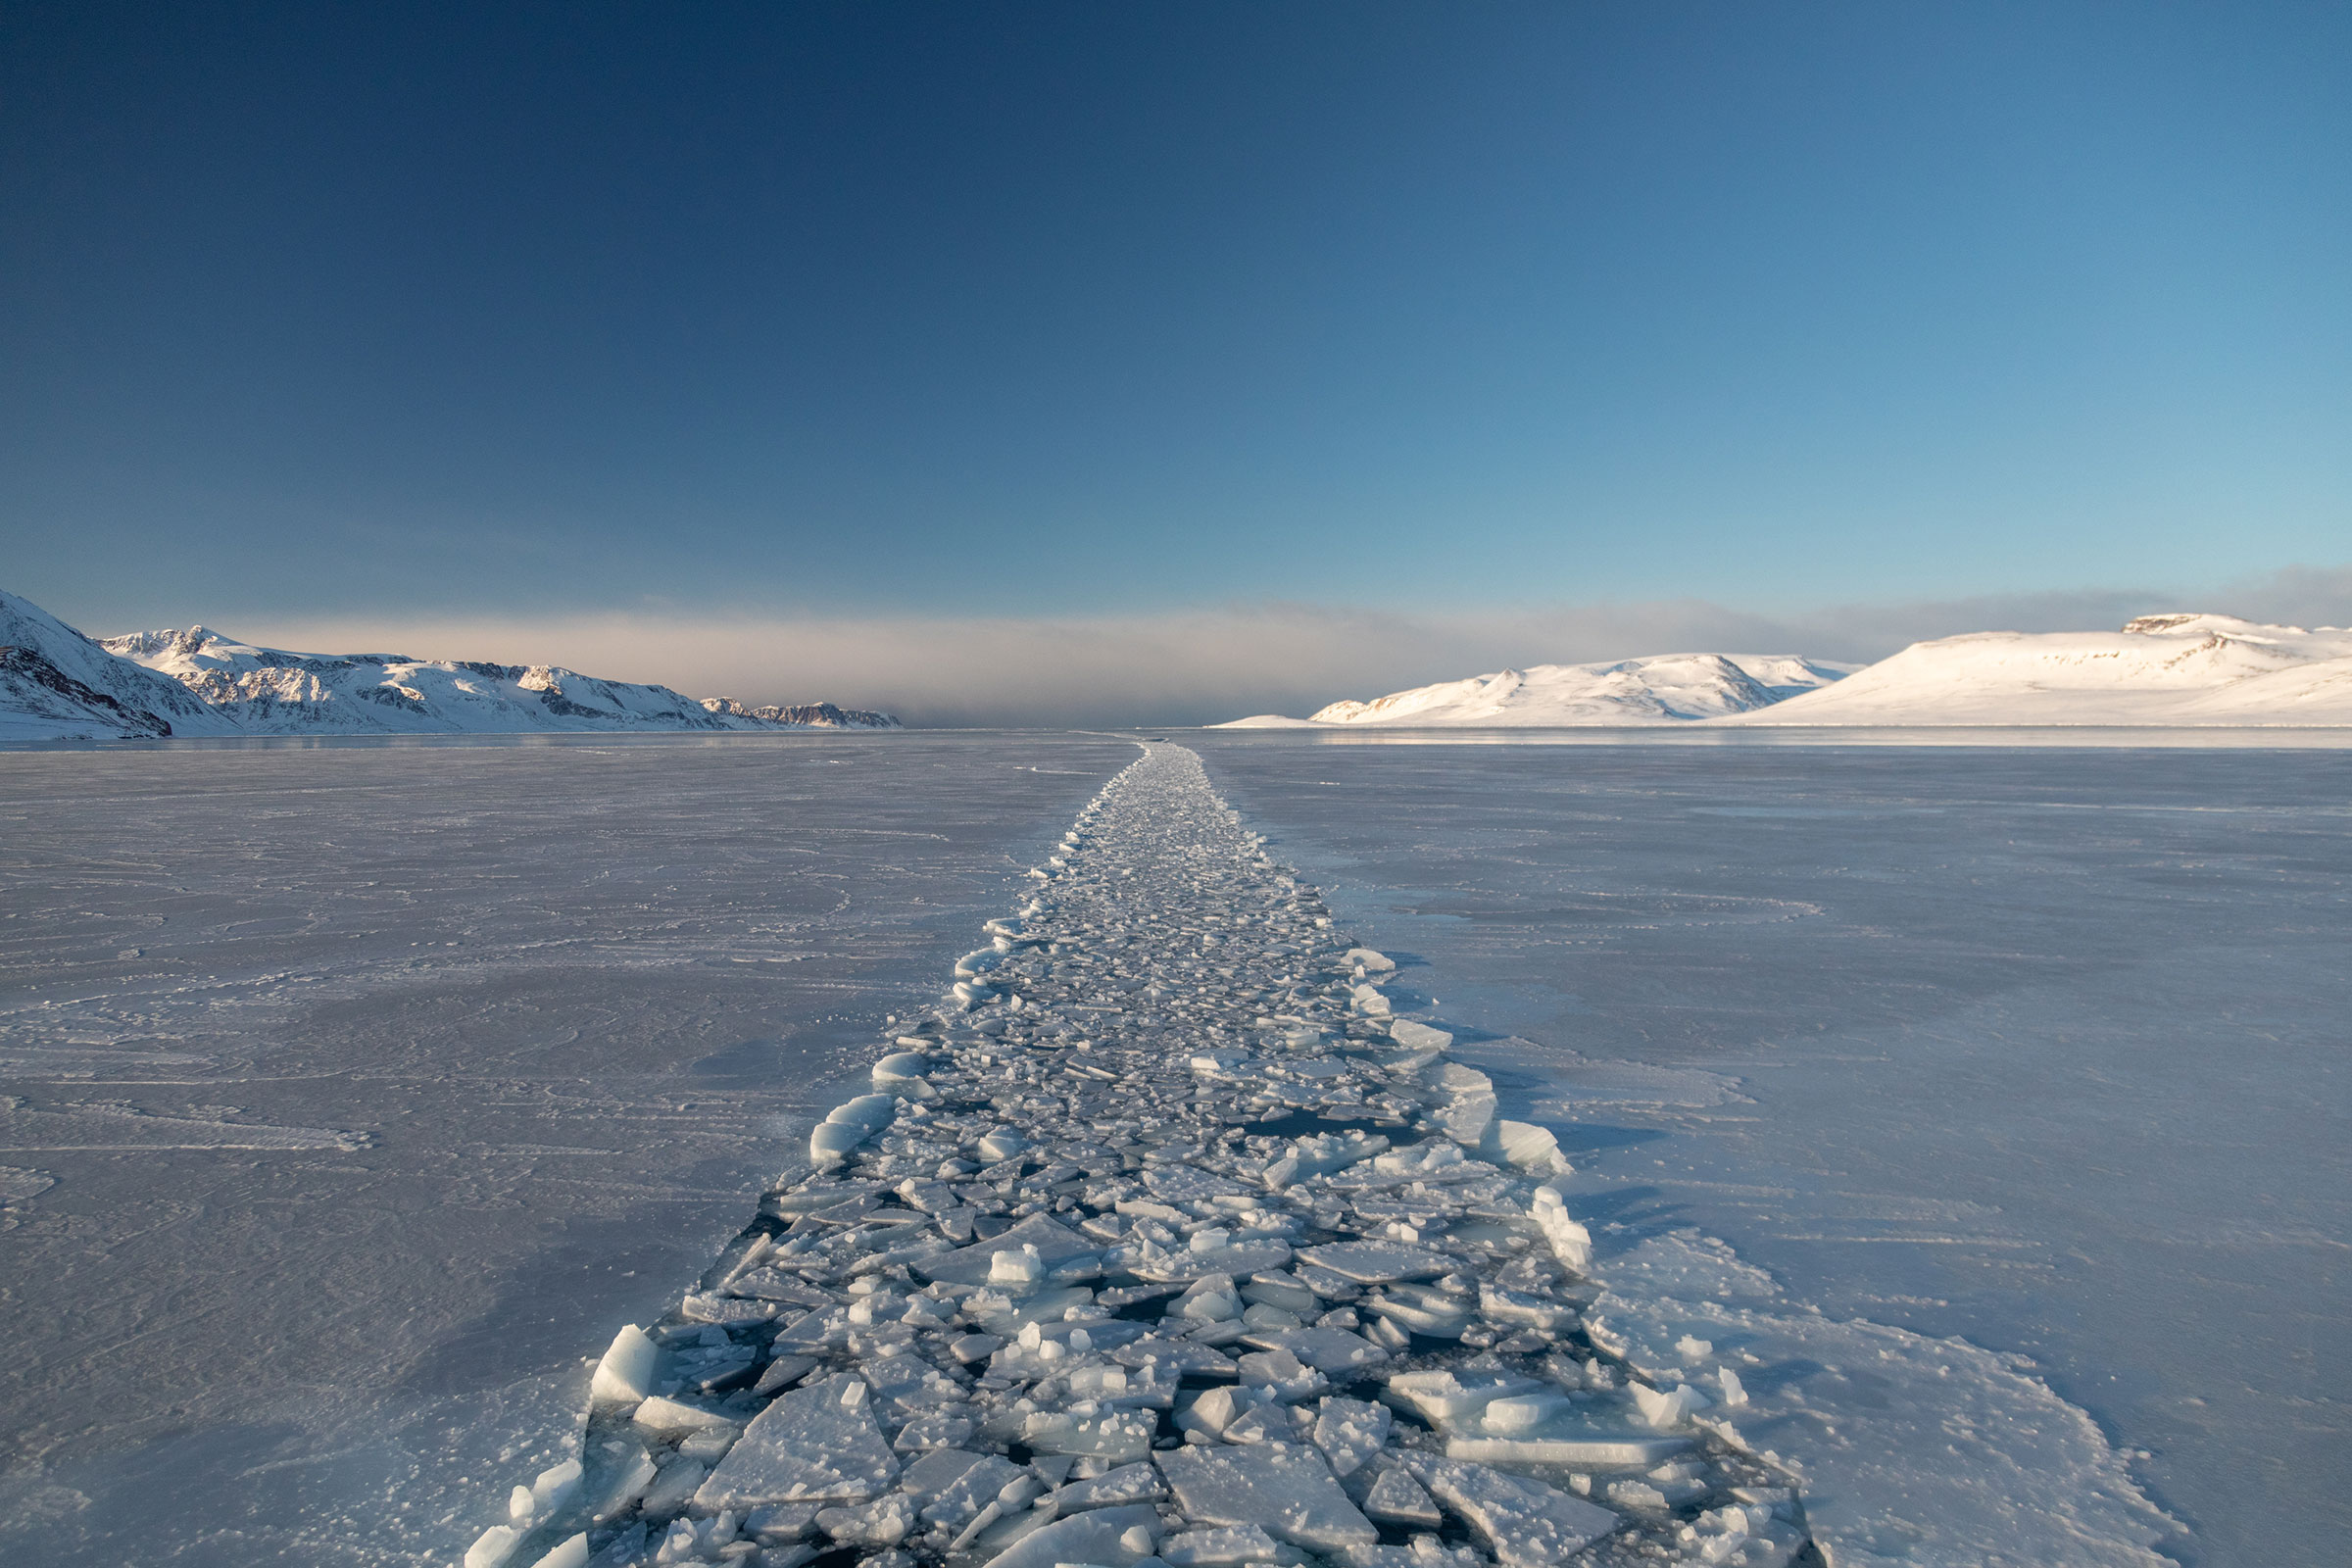 A decade ago, the west coast of Norway’s Svalbard archipelago was impassable by ships until May. Now they can navigate it as early as March, when this 2018 photo was taken. (Photograph by Acacia Johnson)